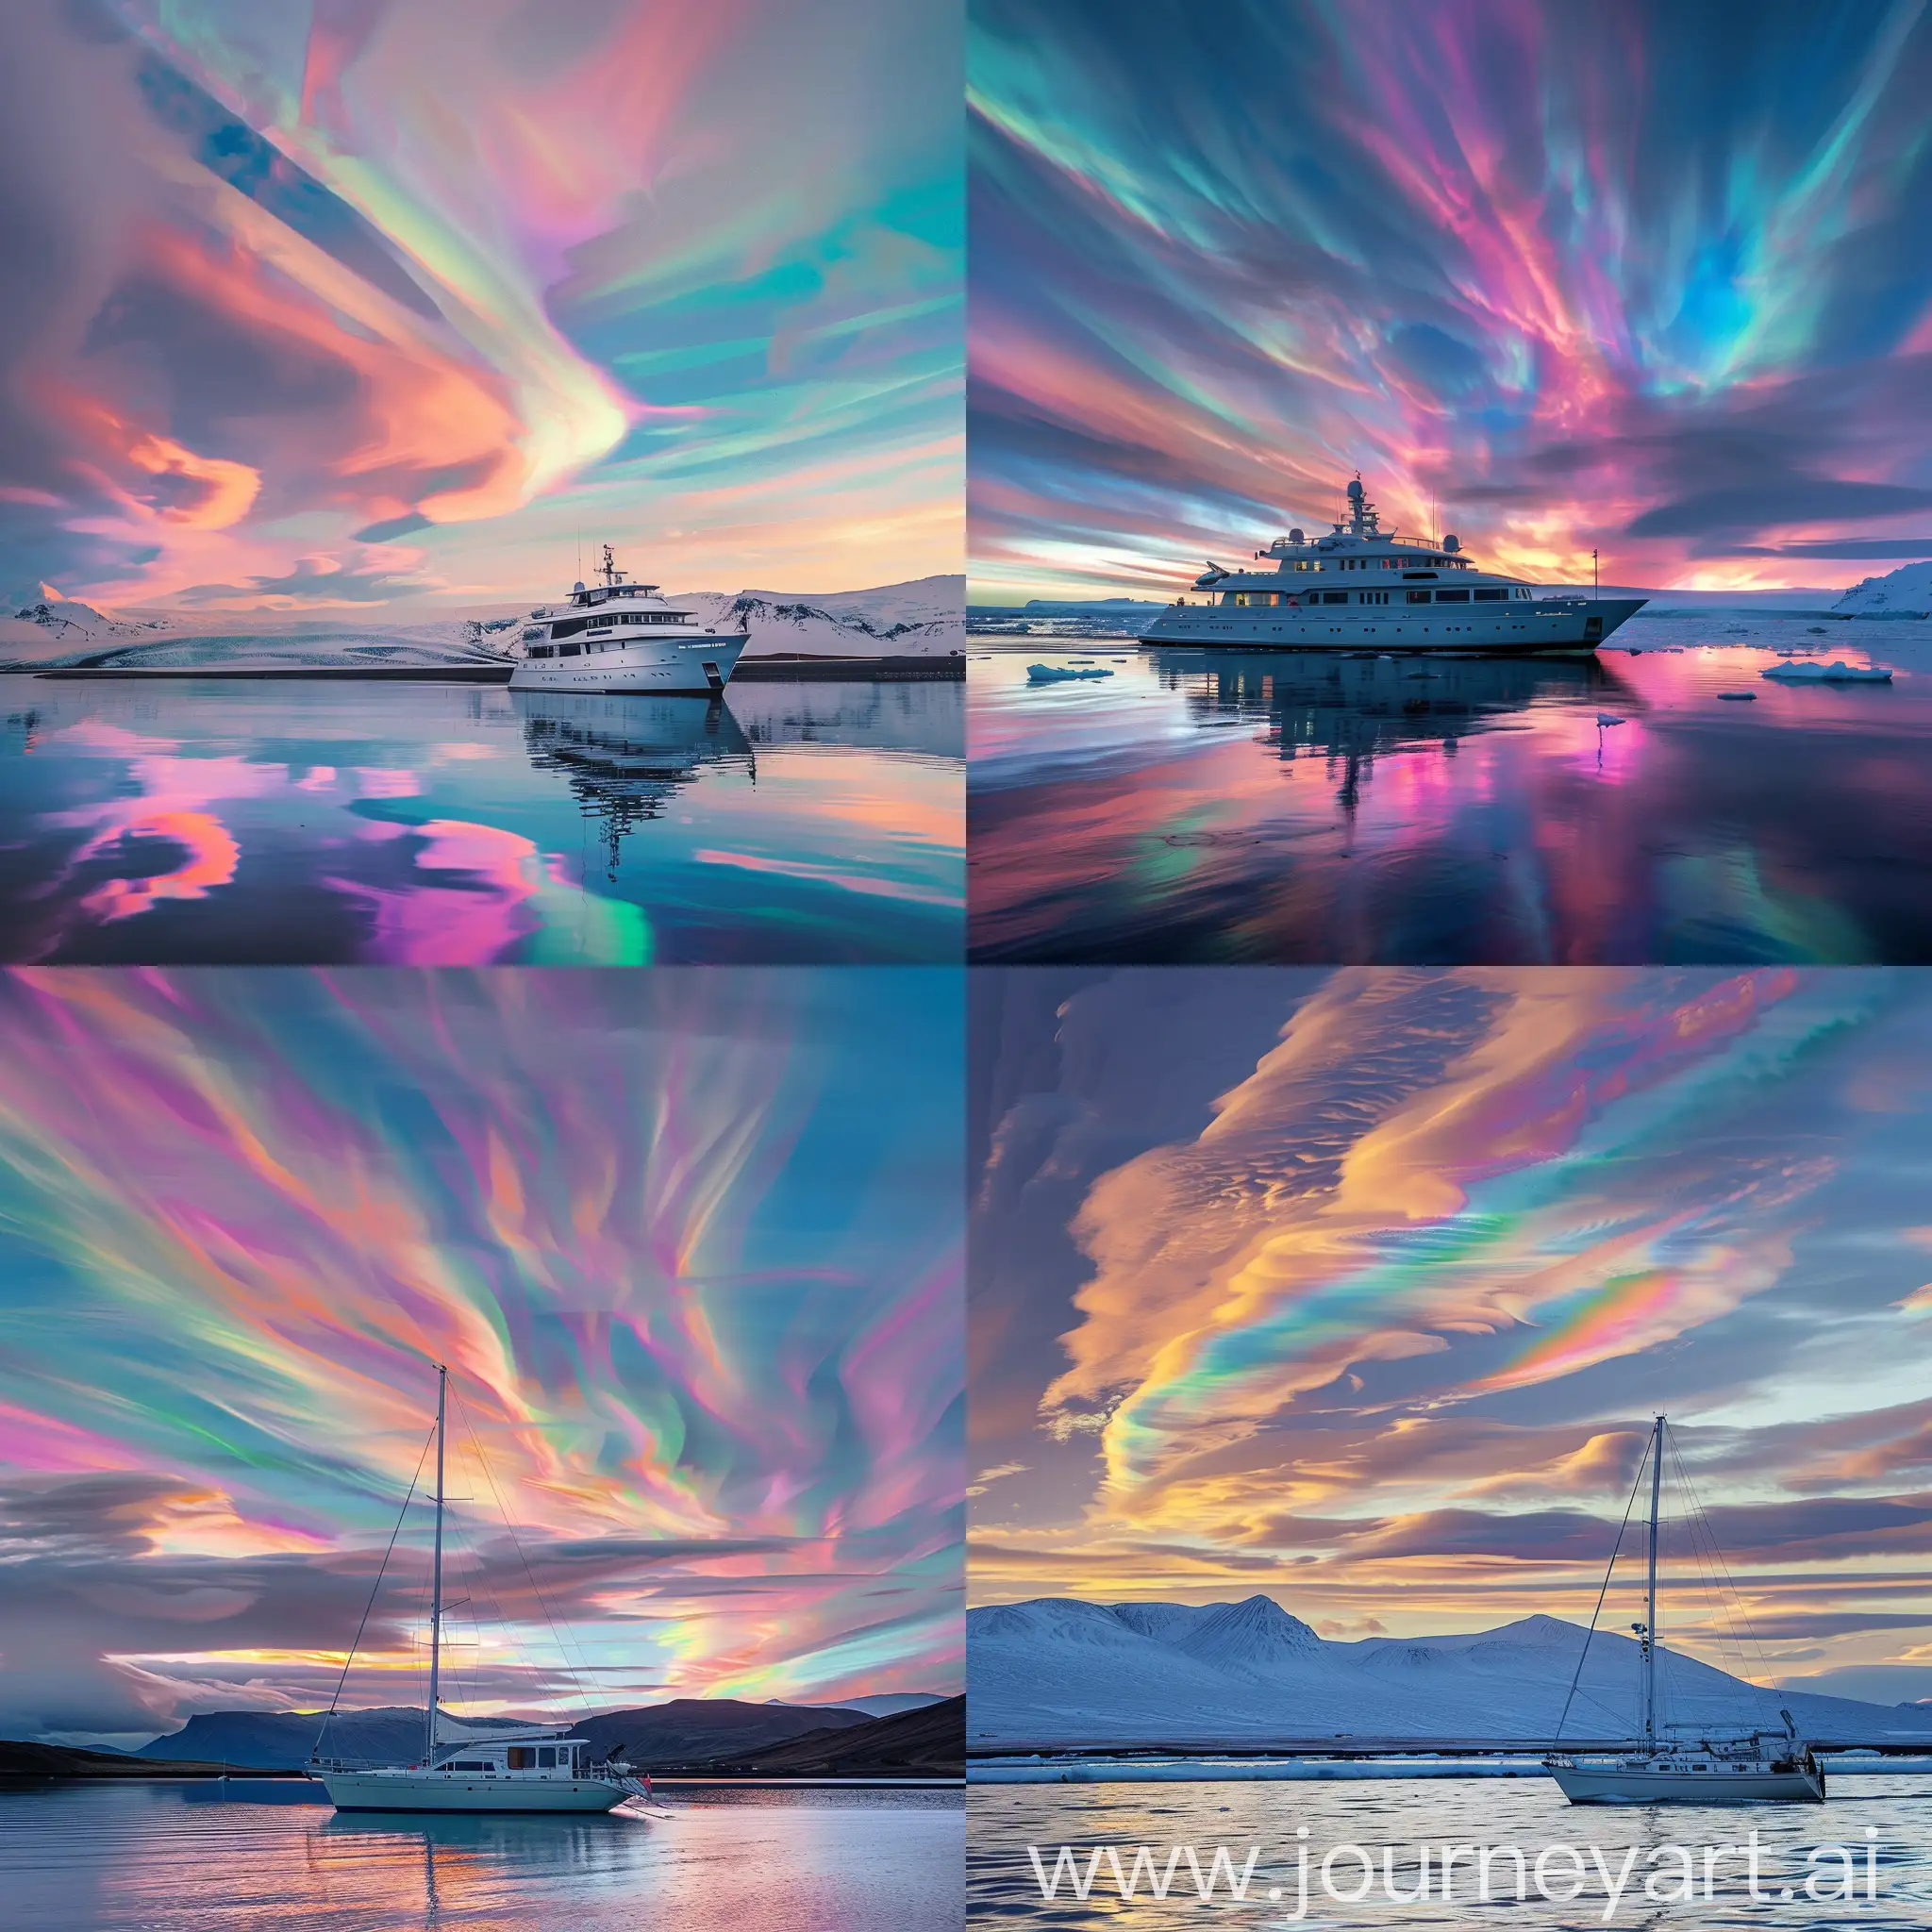 Vibrant-Polar-Stratospheric-Clouds-Over-Iceland-with-White-Yacht